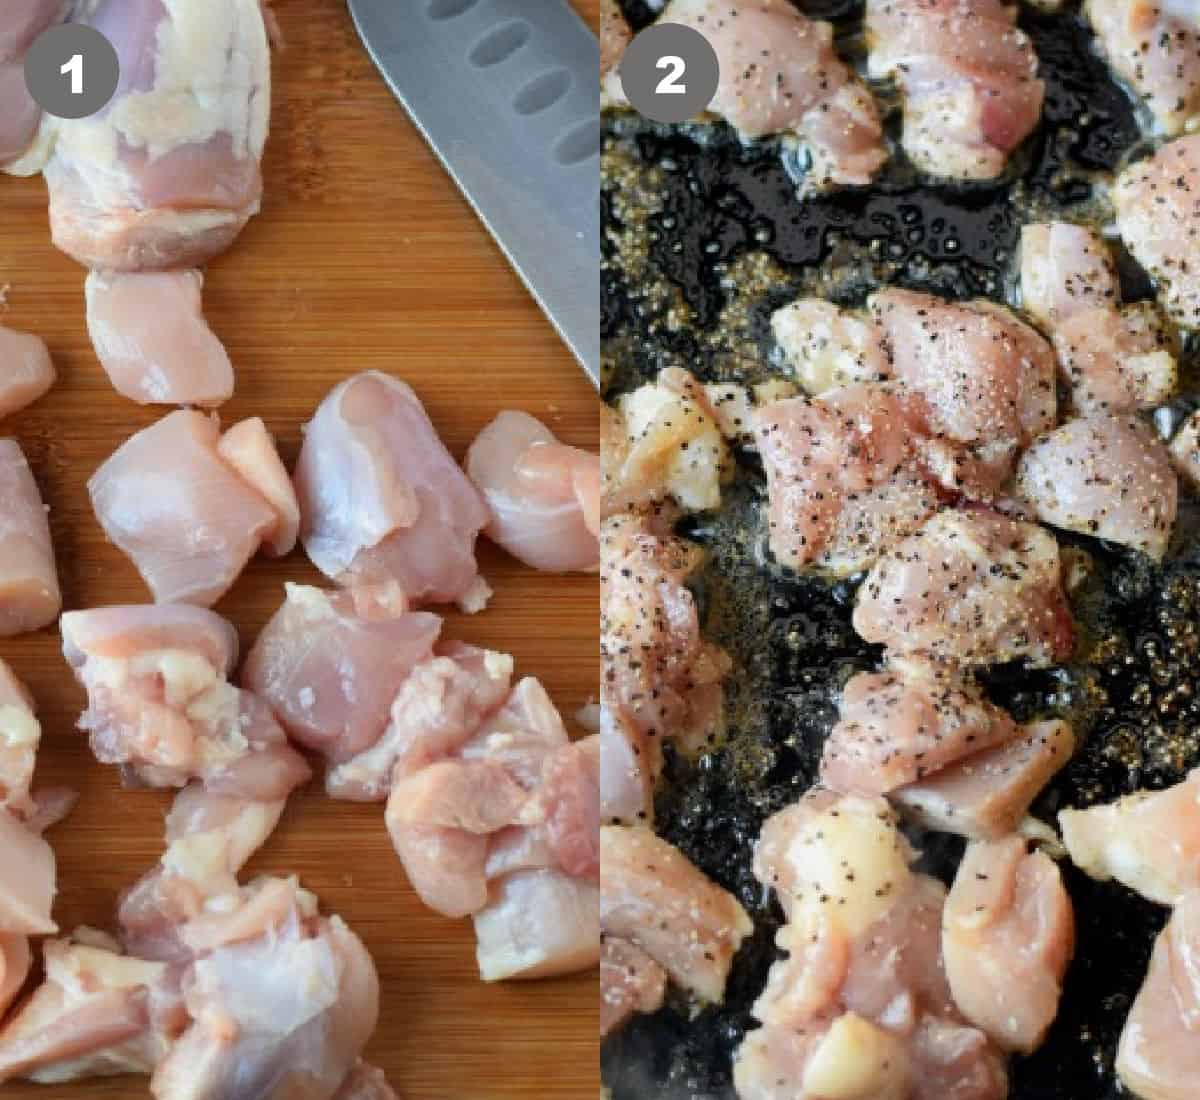 Chopped pieces of chicken thighs then sauteed in a hot skillet.